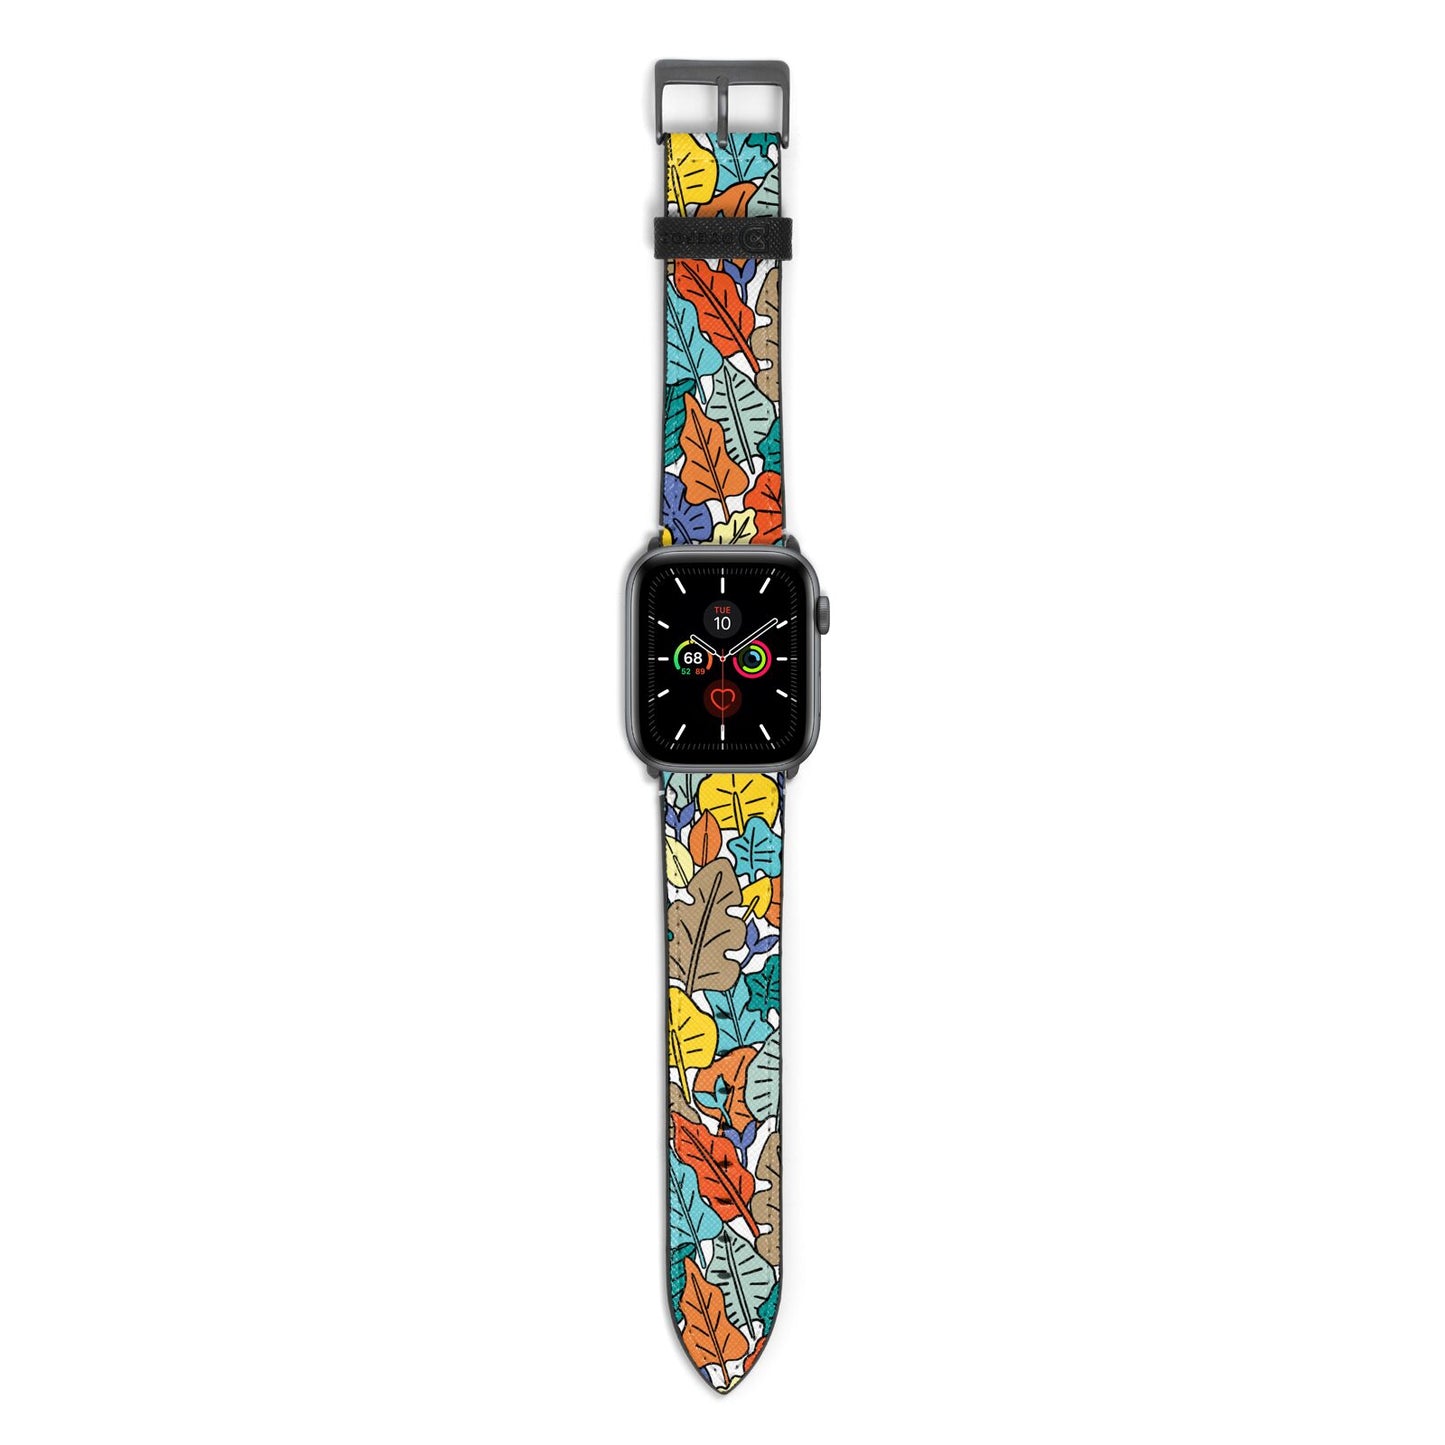 Autumn Leaves Apple Watch Strap with Space Grey Hardware